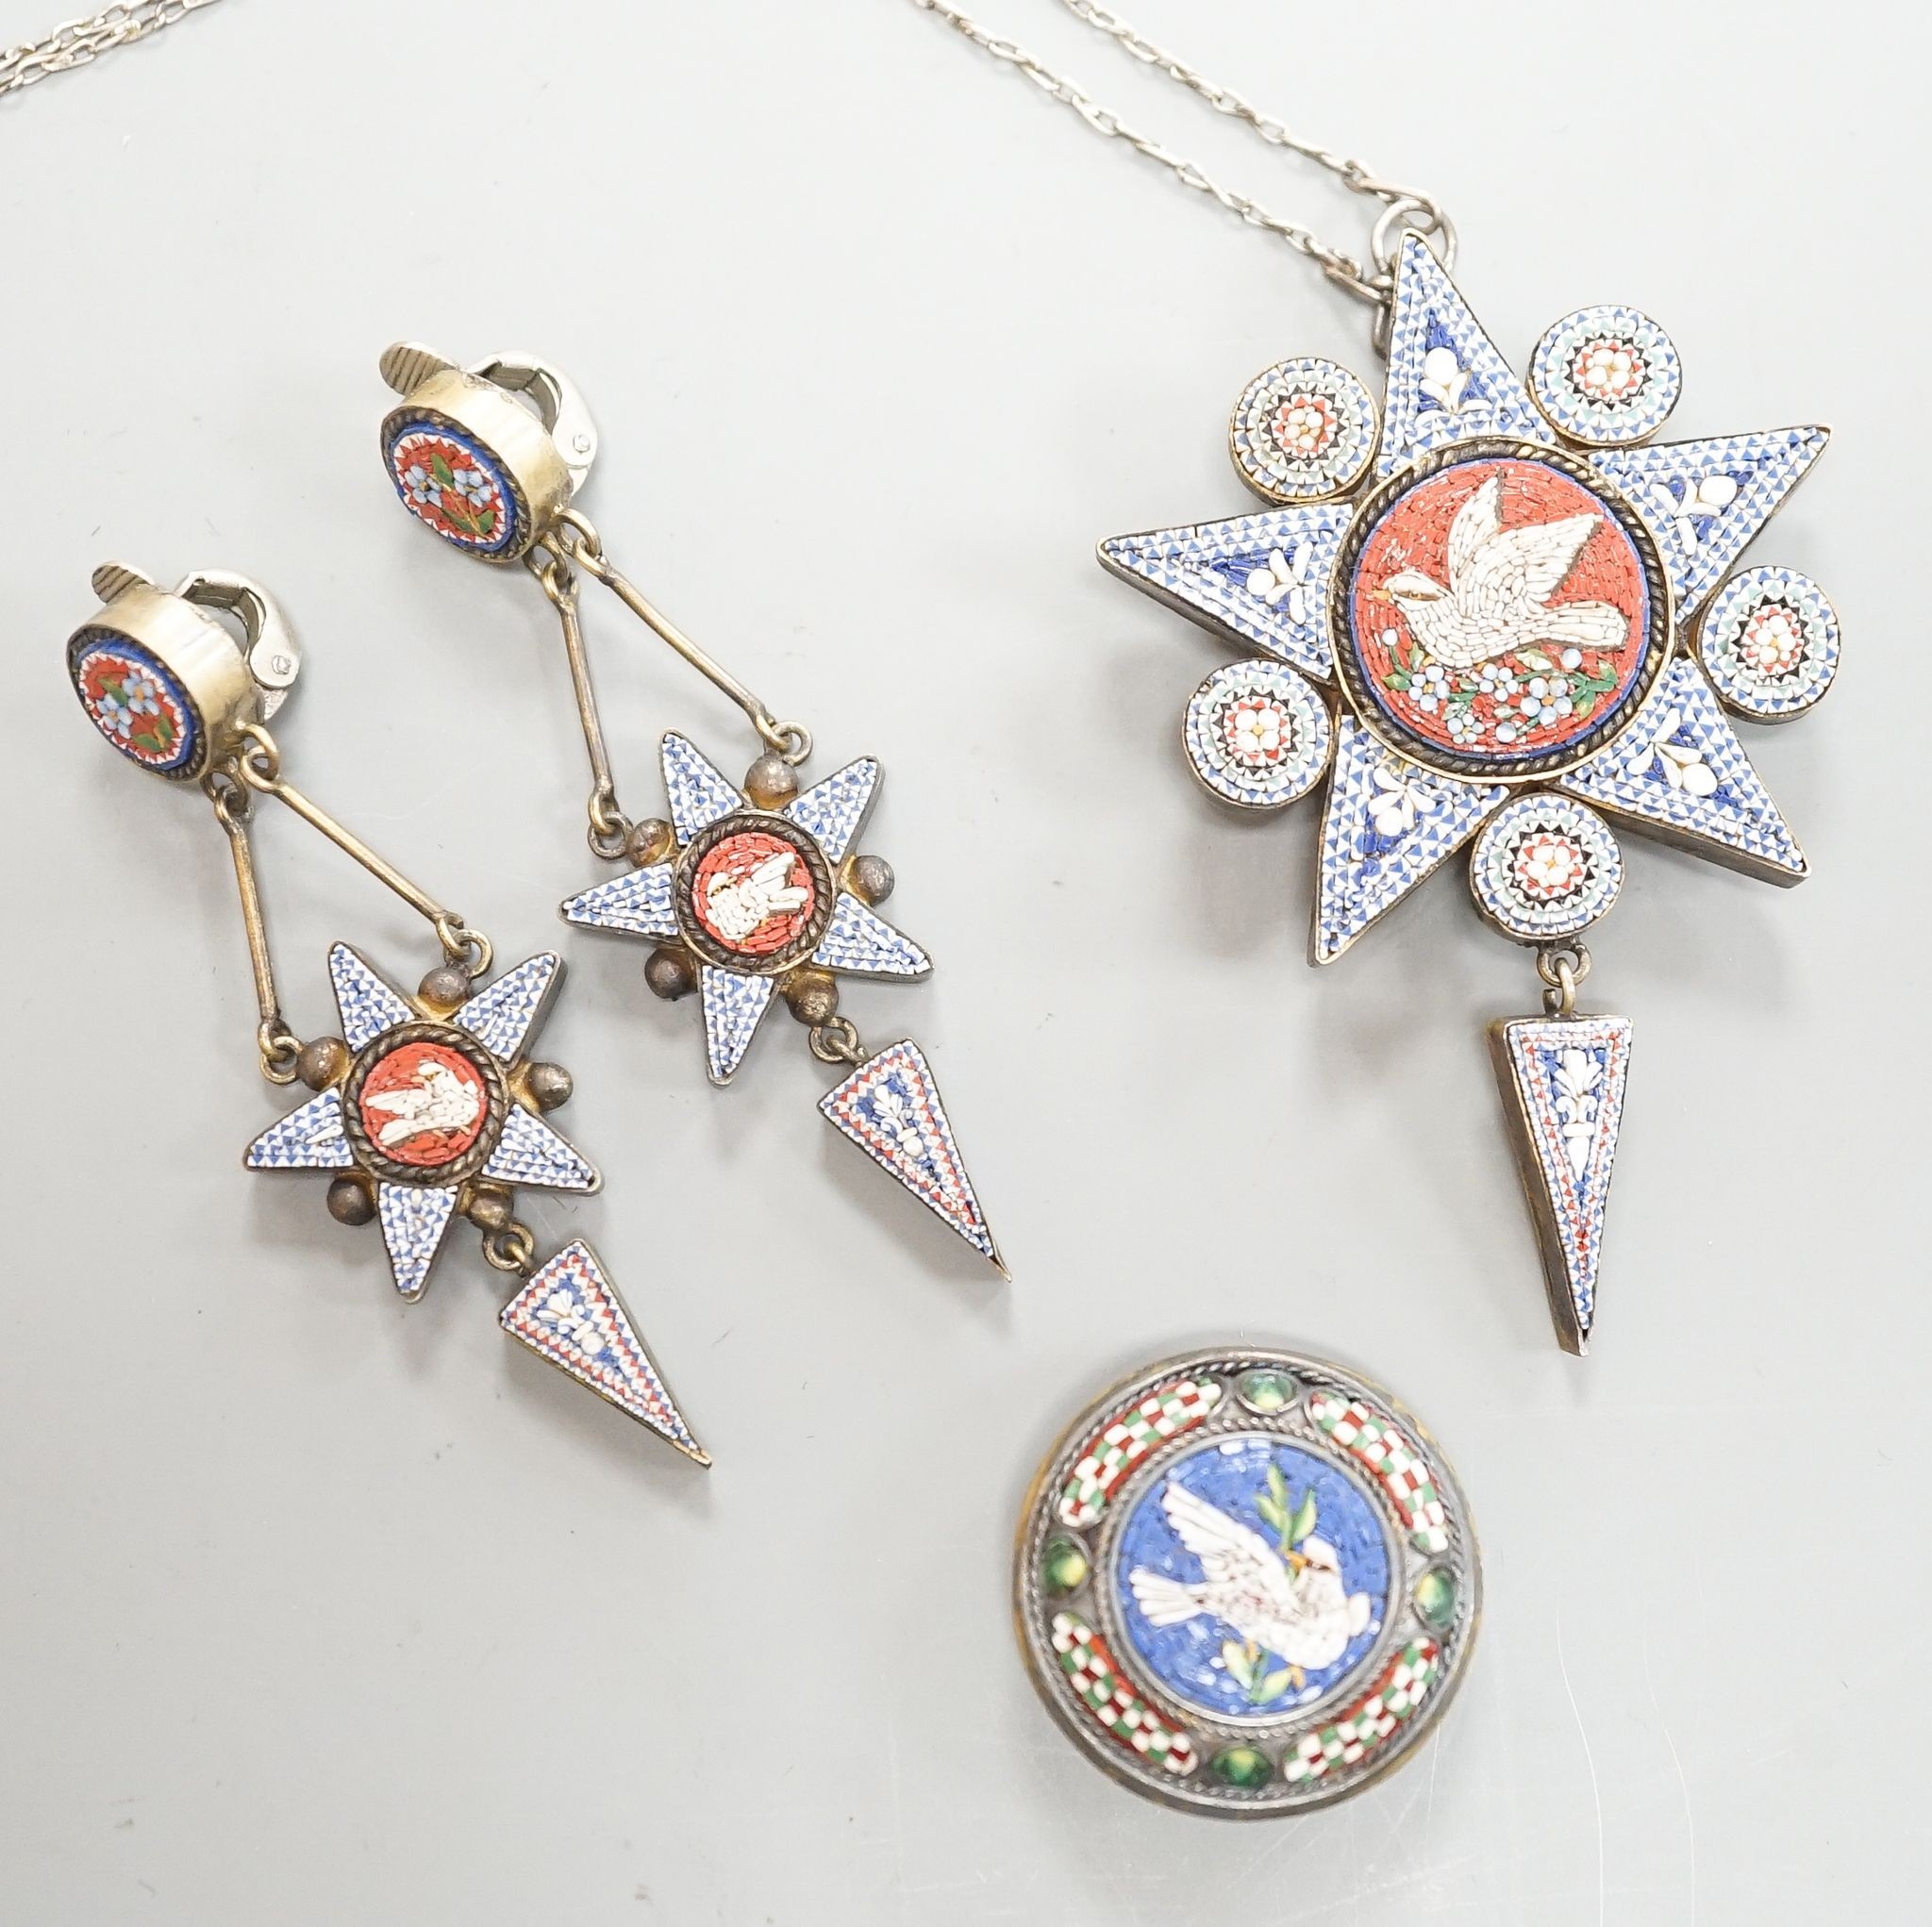 A 19th century Italian gilt metal and micro-mosaic drop pendant on chain, pendant 6cm and a pair of matching drop earrings and a micro-mosaic button